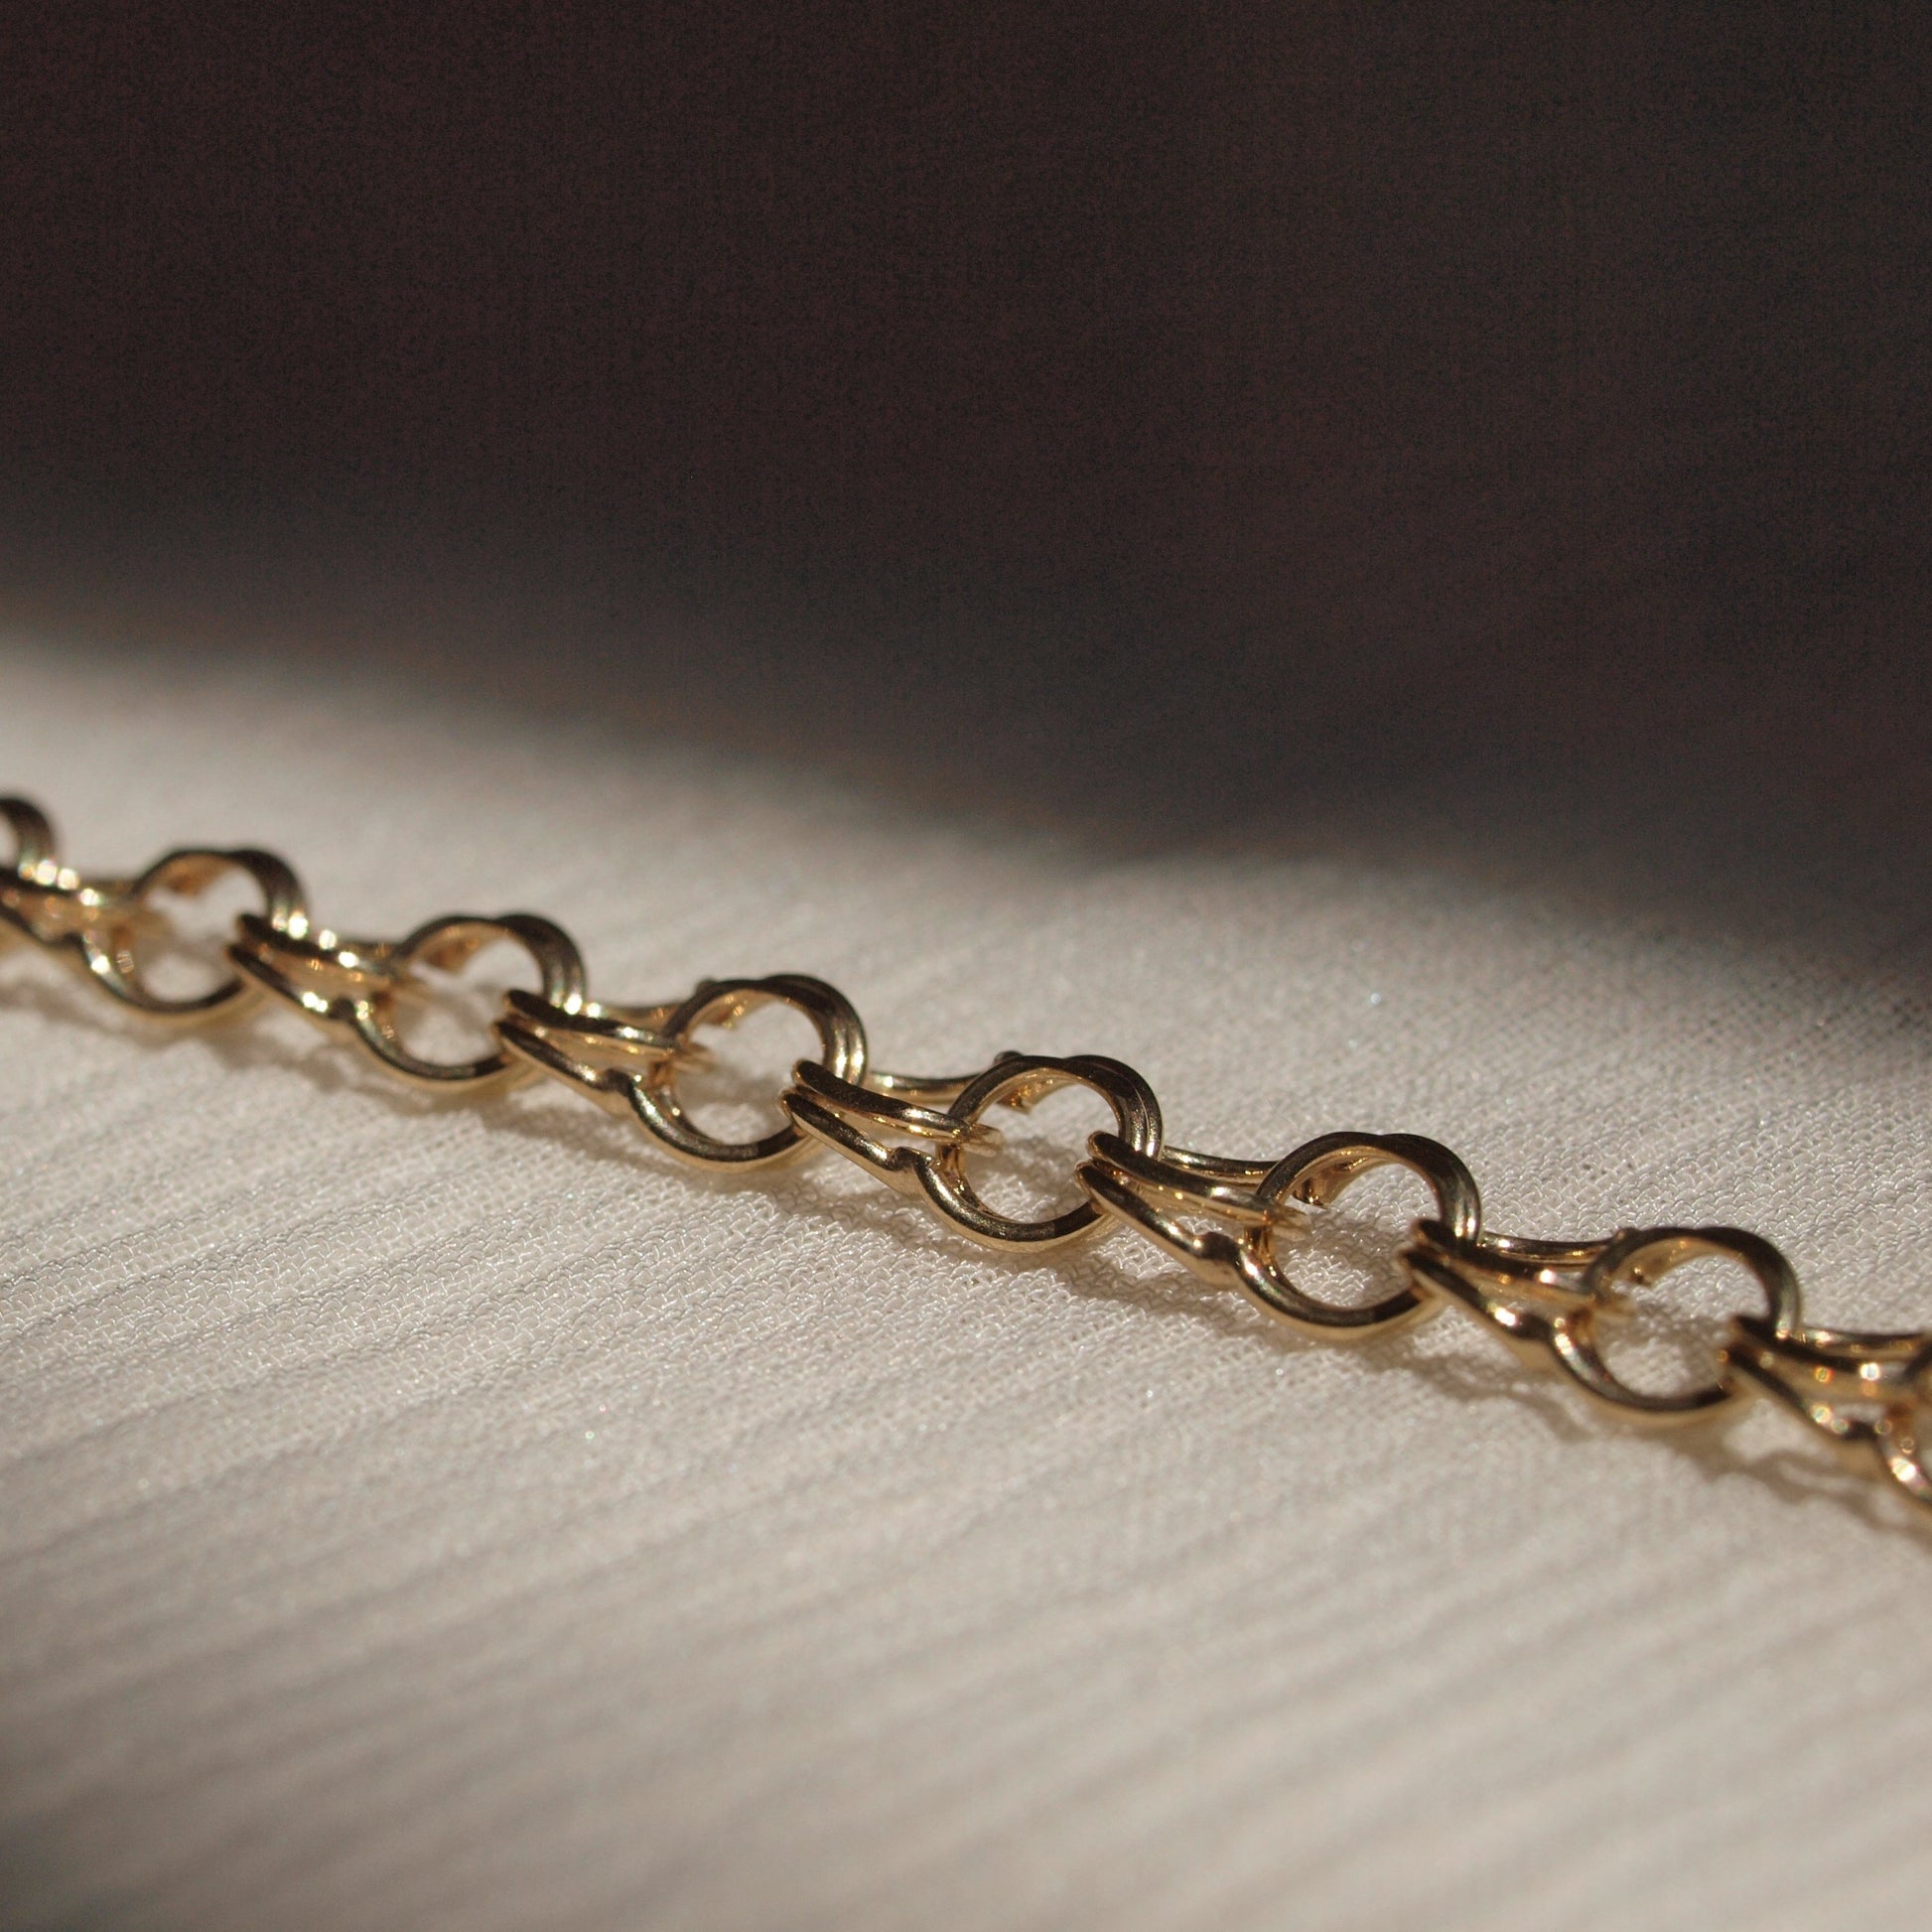 Reclaimed 14k Yellow Gold Double Circle Chain Bracelet (Up Close)